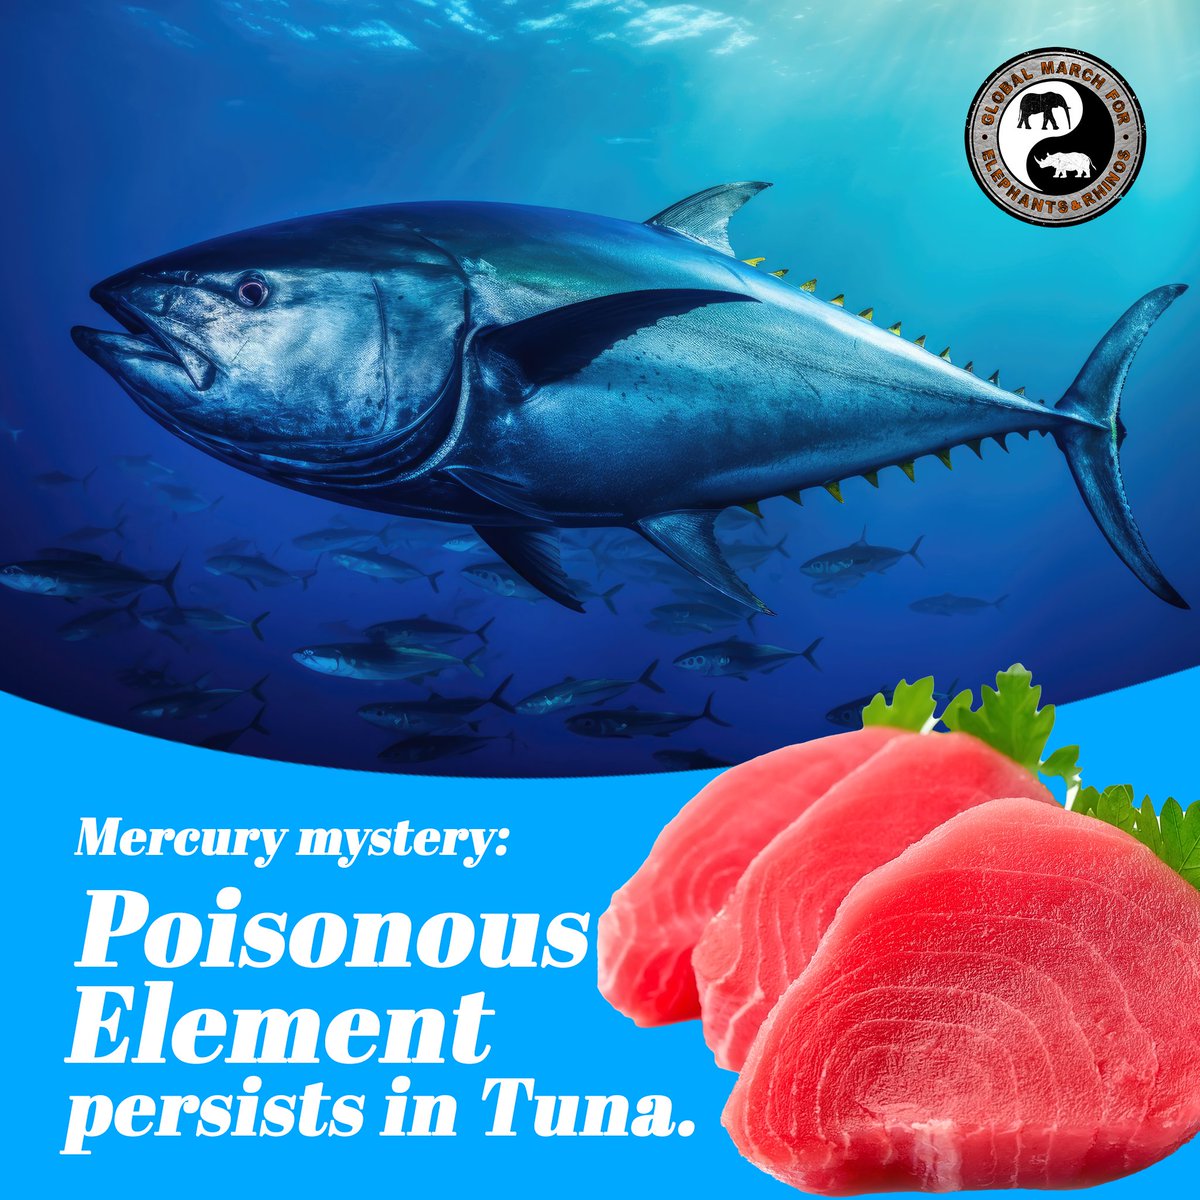 ❗Mercury mystery: Poisonous element persists in Tuna. 🦈 Levels of mercury persist in tuna, decades after pollution controls were introduced to limit emissions. 💥 The Answer: Very old mercury lurks deep in the ocean and wells up into the waters where the tuna swim. 🦈 The